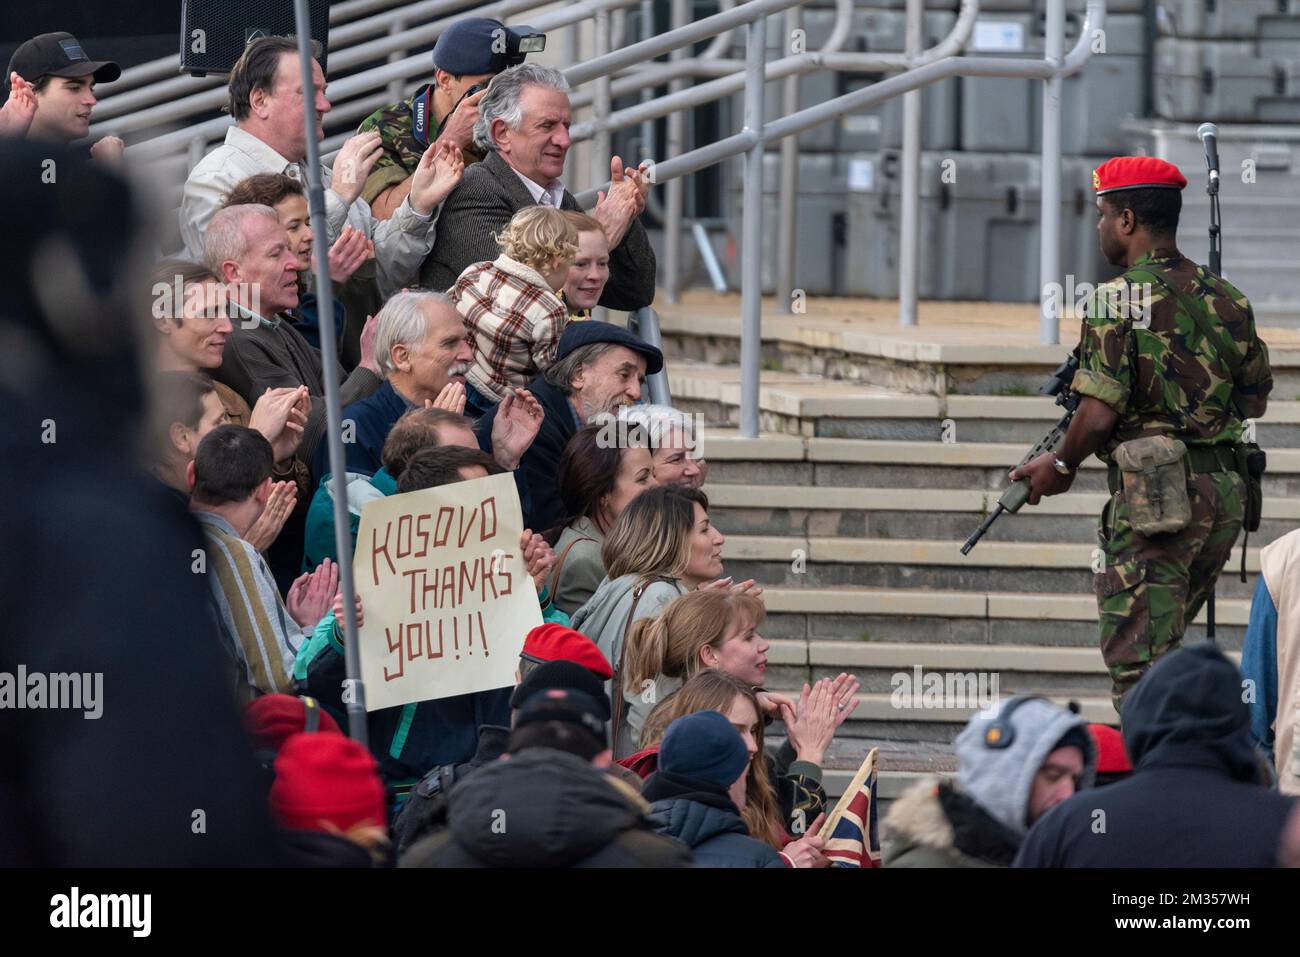 Soldier and Kosovan crowd during filming for series 6 of Netflix The Crown on location in Southend on Sea, Essex, UK. For Tony Blair in Kosovo set Stock Photo